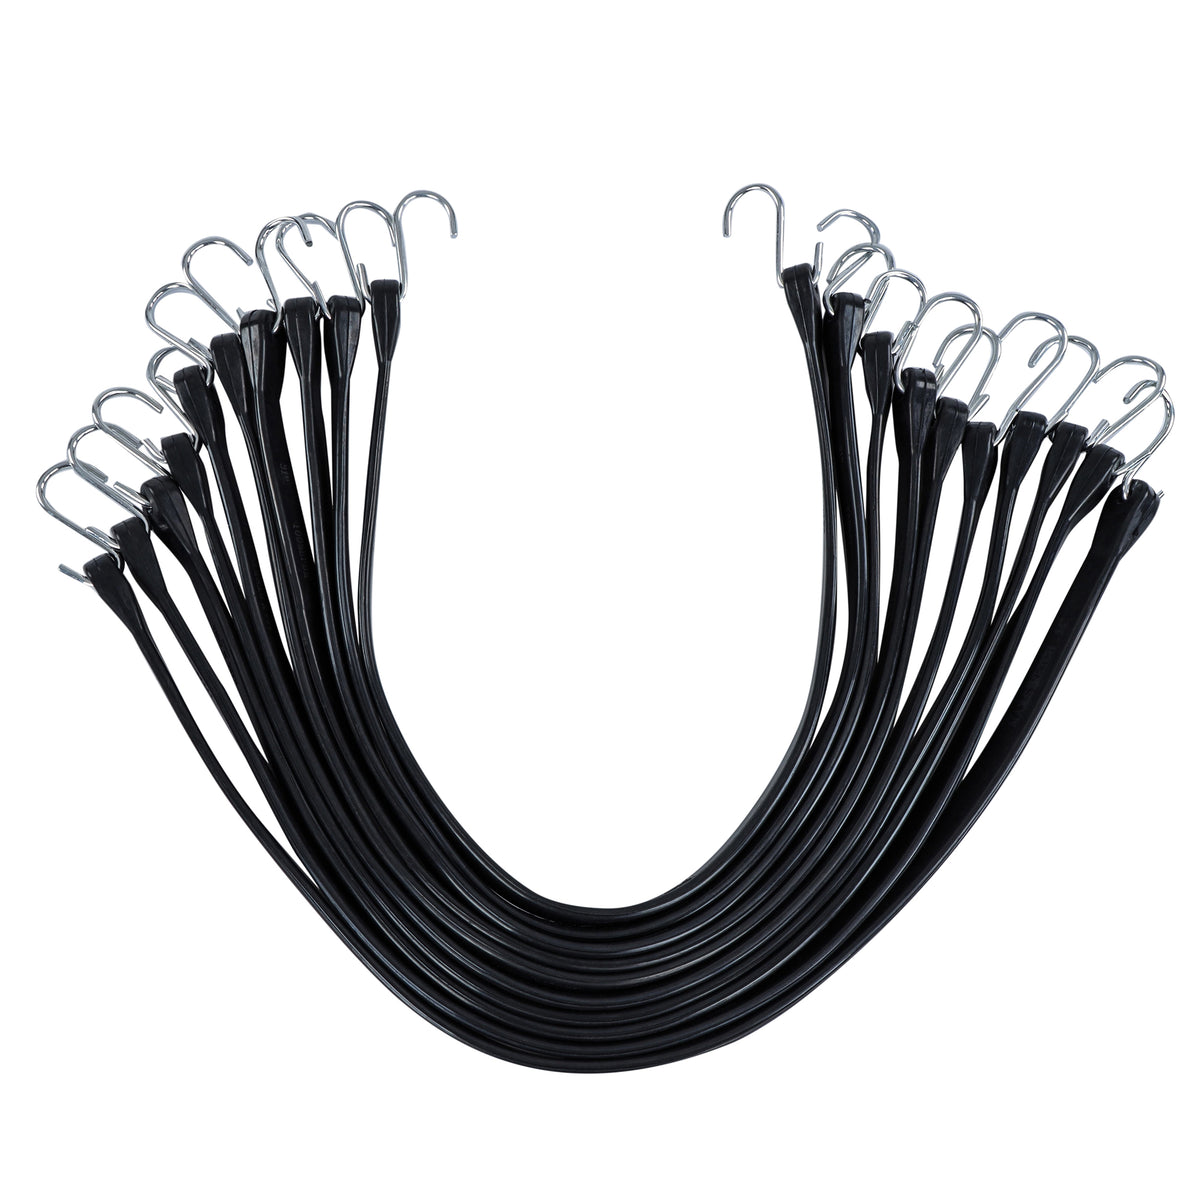 EPDM Rubber Straps with Hooks - 31in Black Rubber Bungee Cords, 10Pk